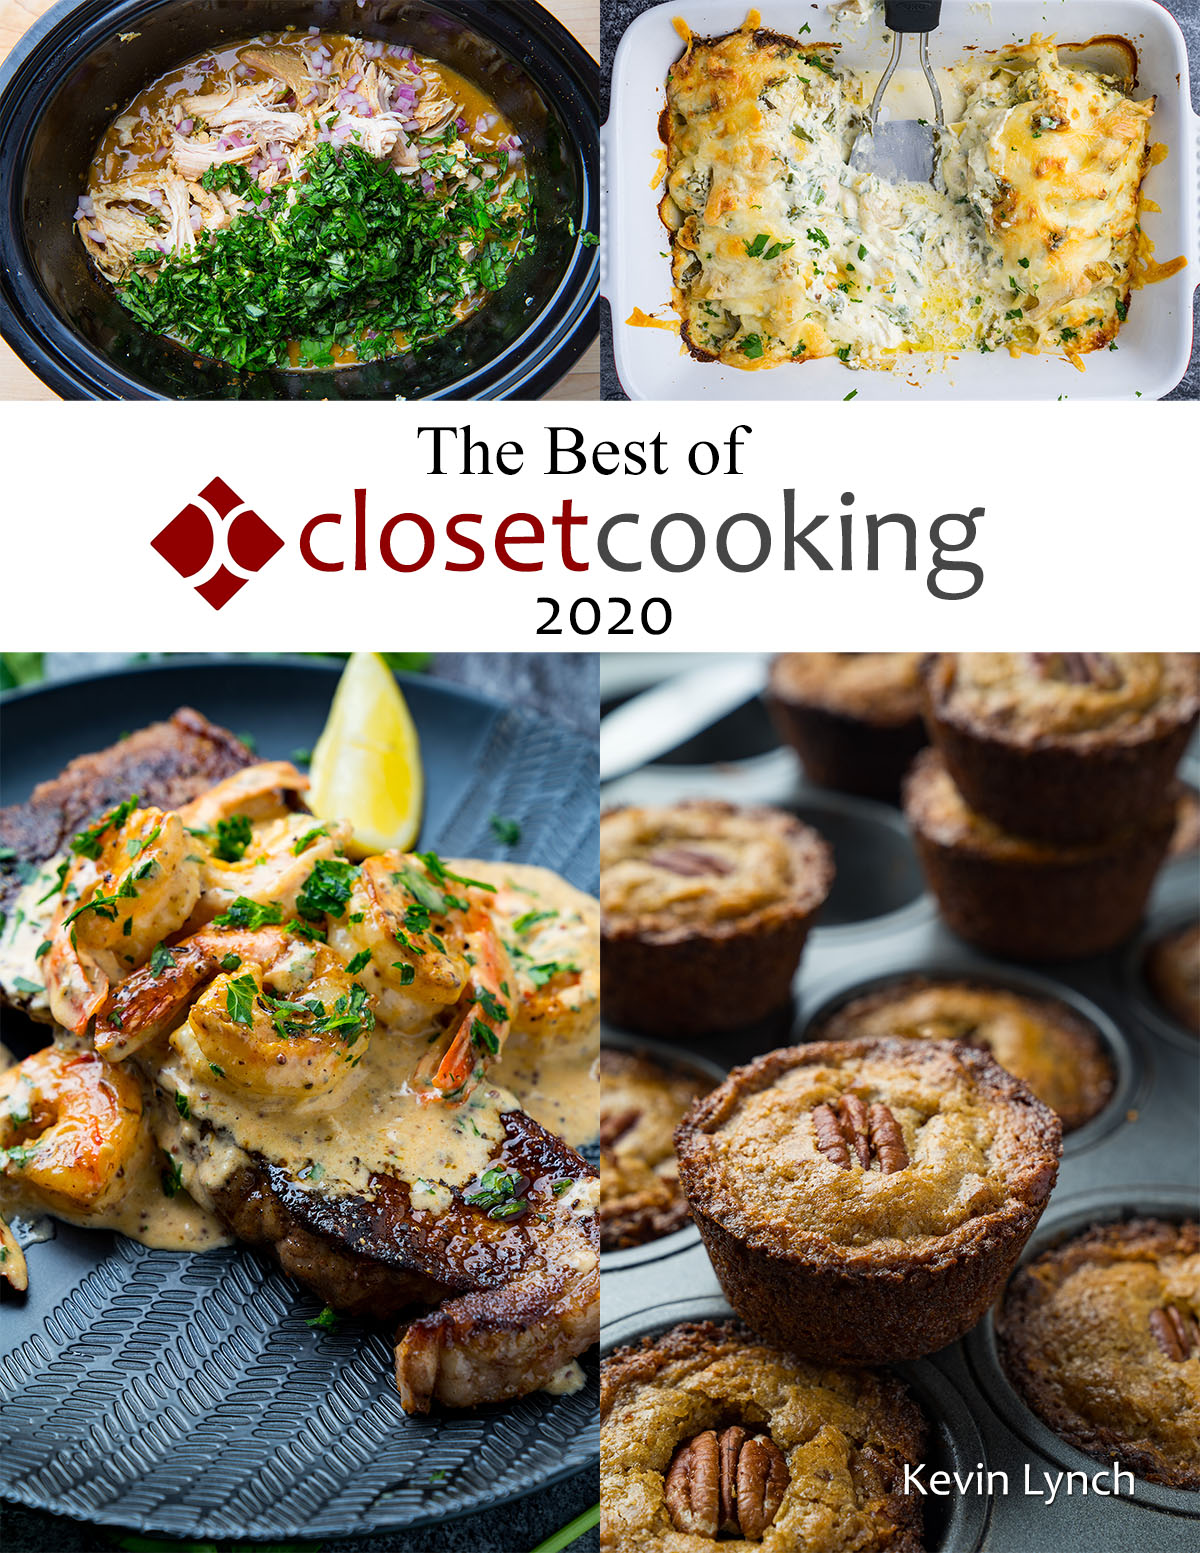 The Best of Closet Cooking 2020 Cookbook